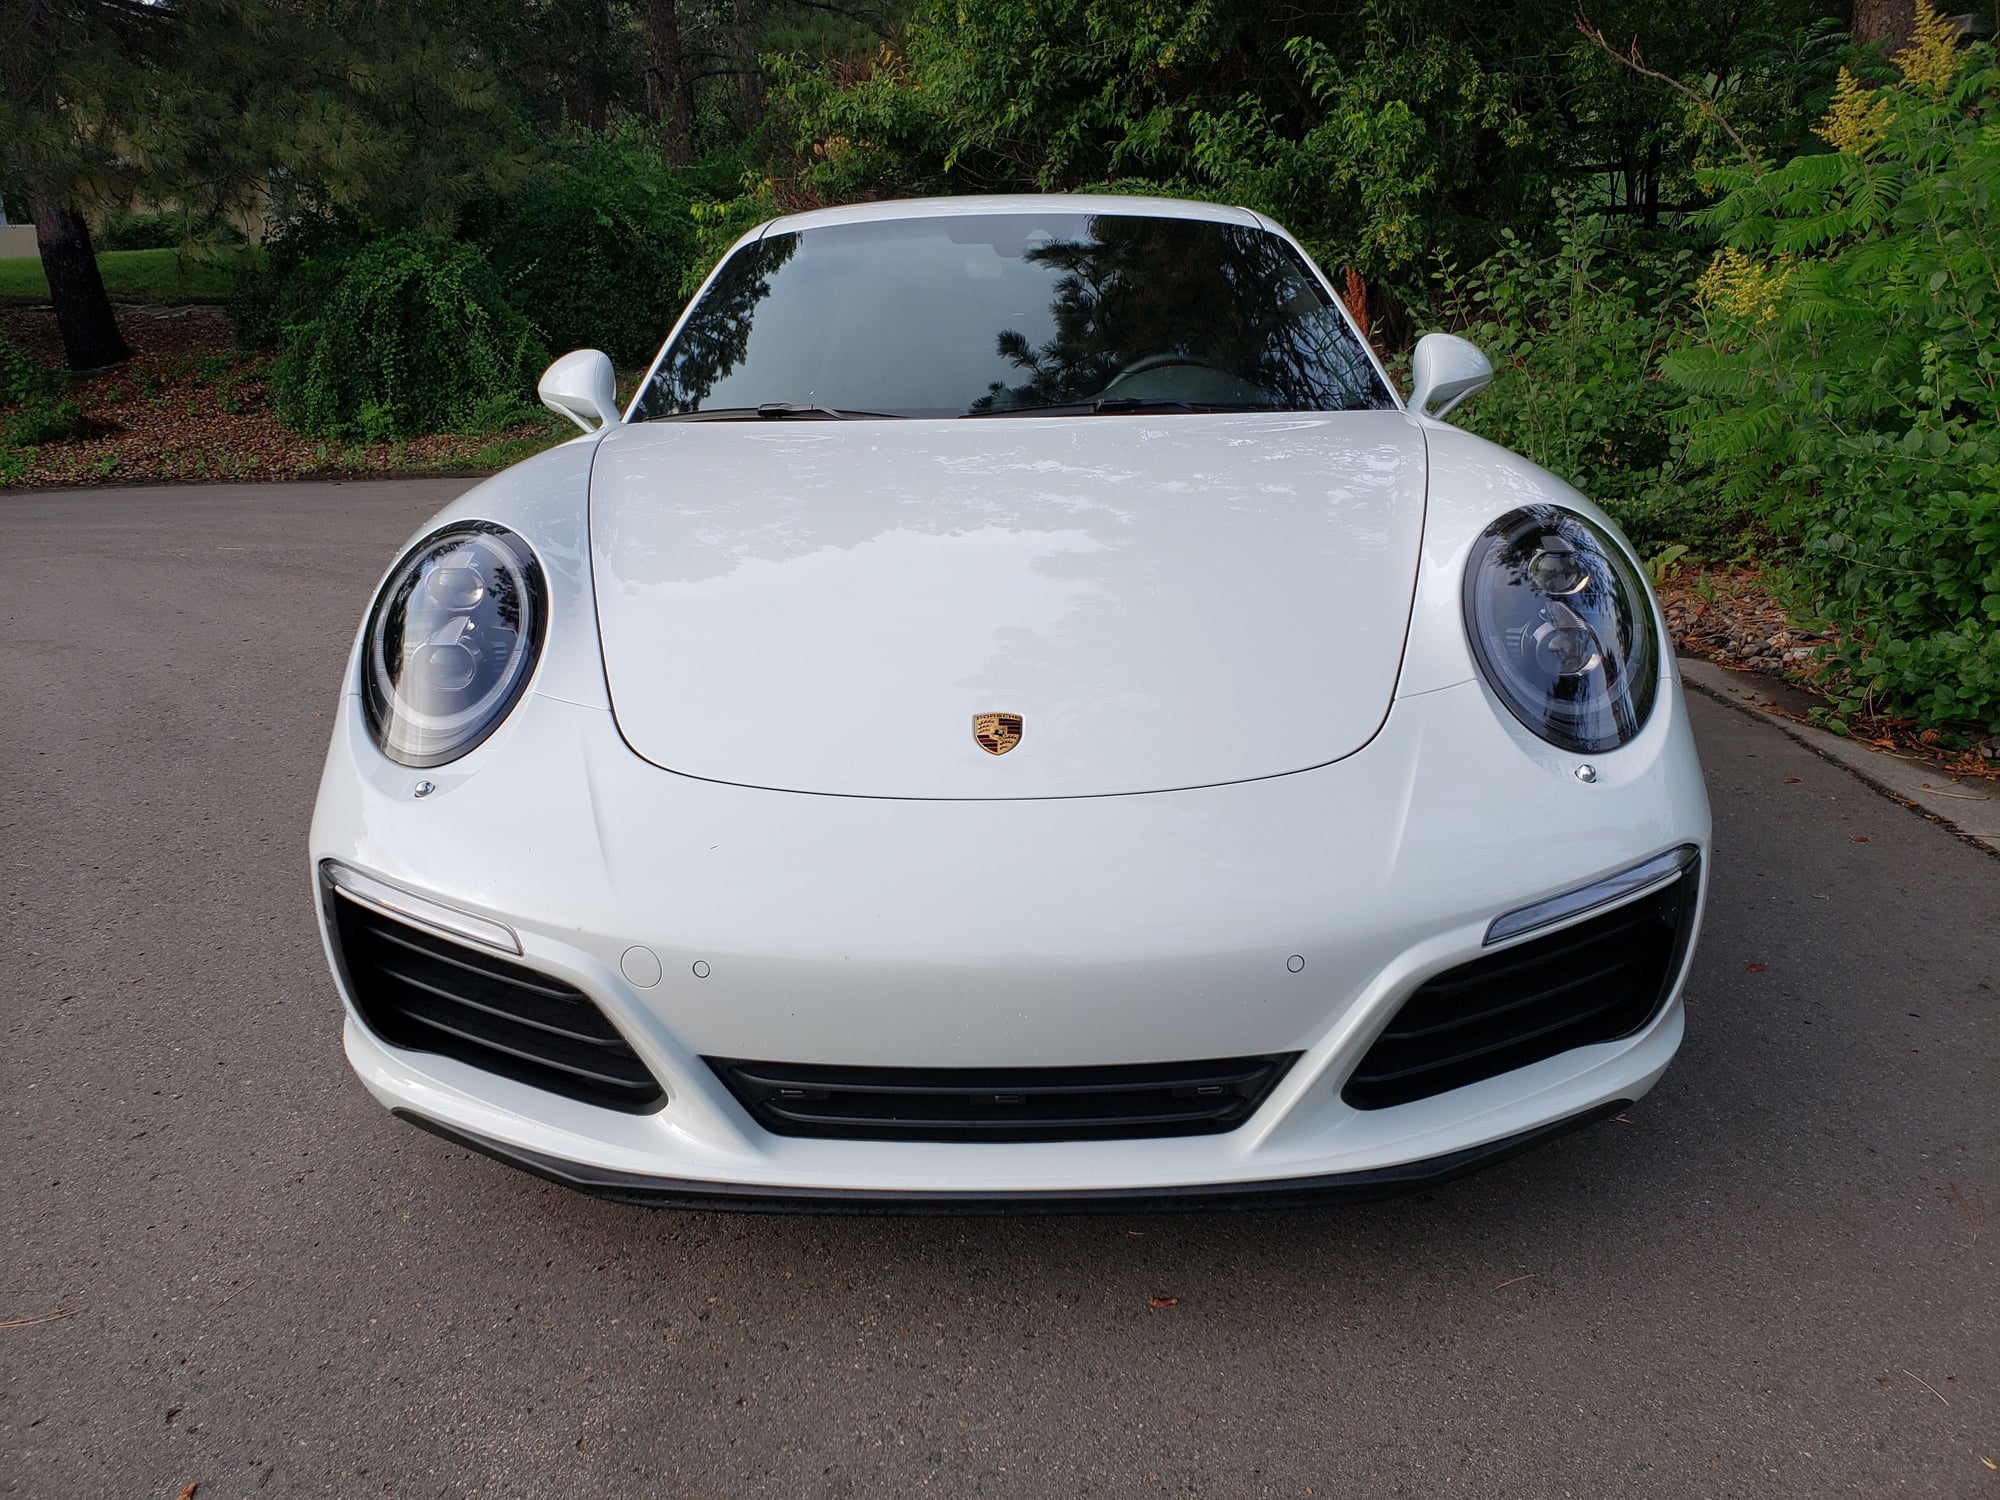 2017 Porsche 911 - 2017 911 (991.2) CPO MANUAL C2 - Used - VIN WP0AA2A94HS107594 - 19,760 Miles - 6 cyl - 2WD - Manual - Coupe - White - Centennial, CO 80111, United States